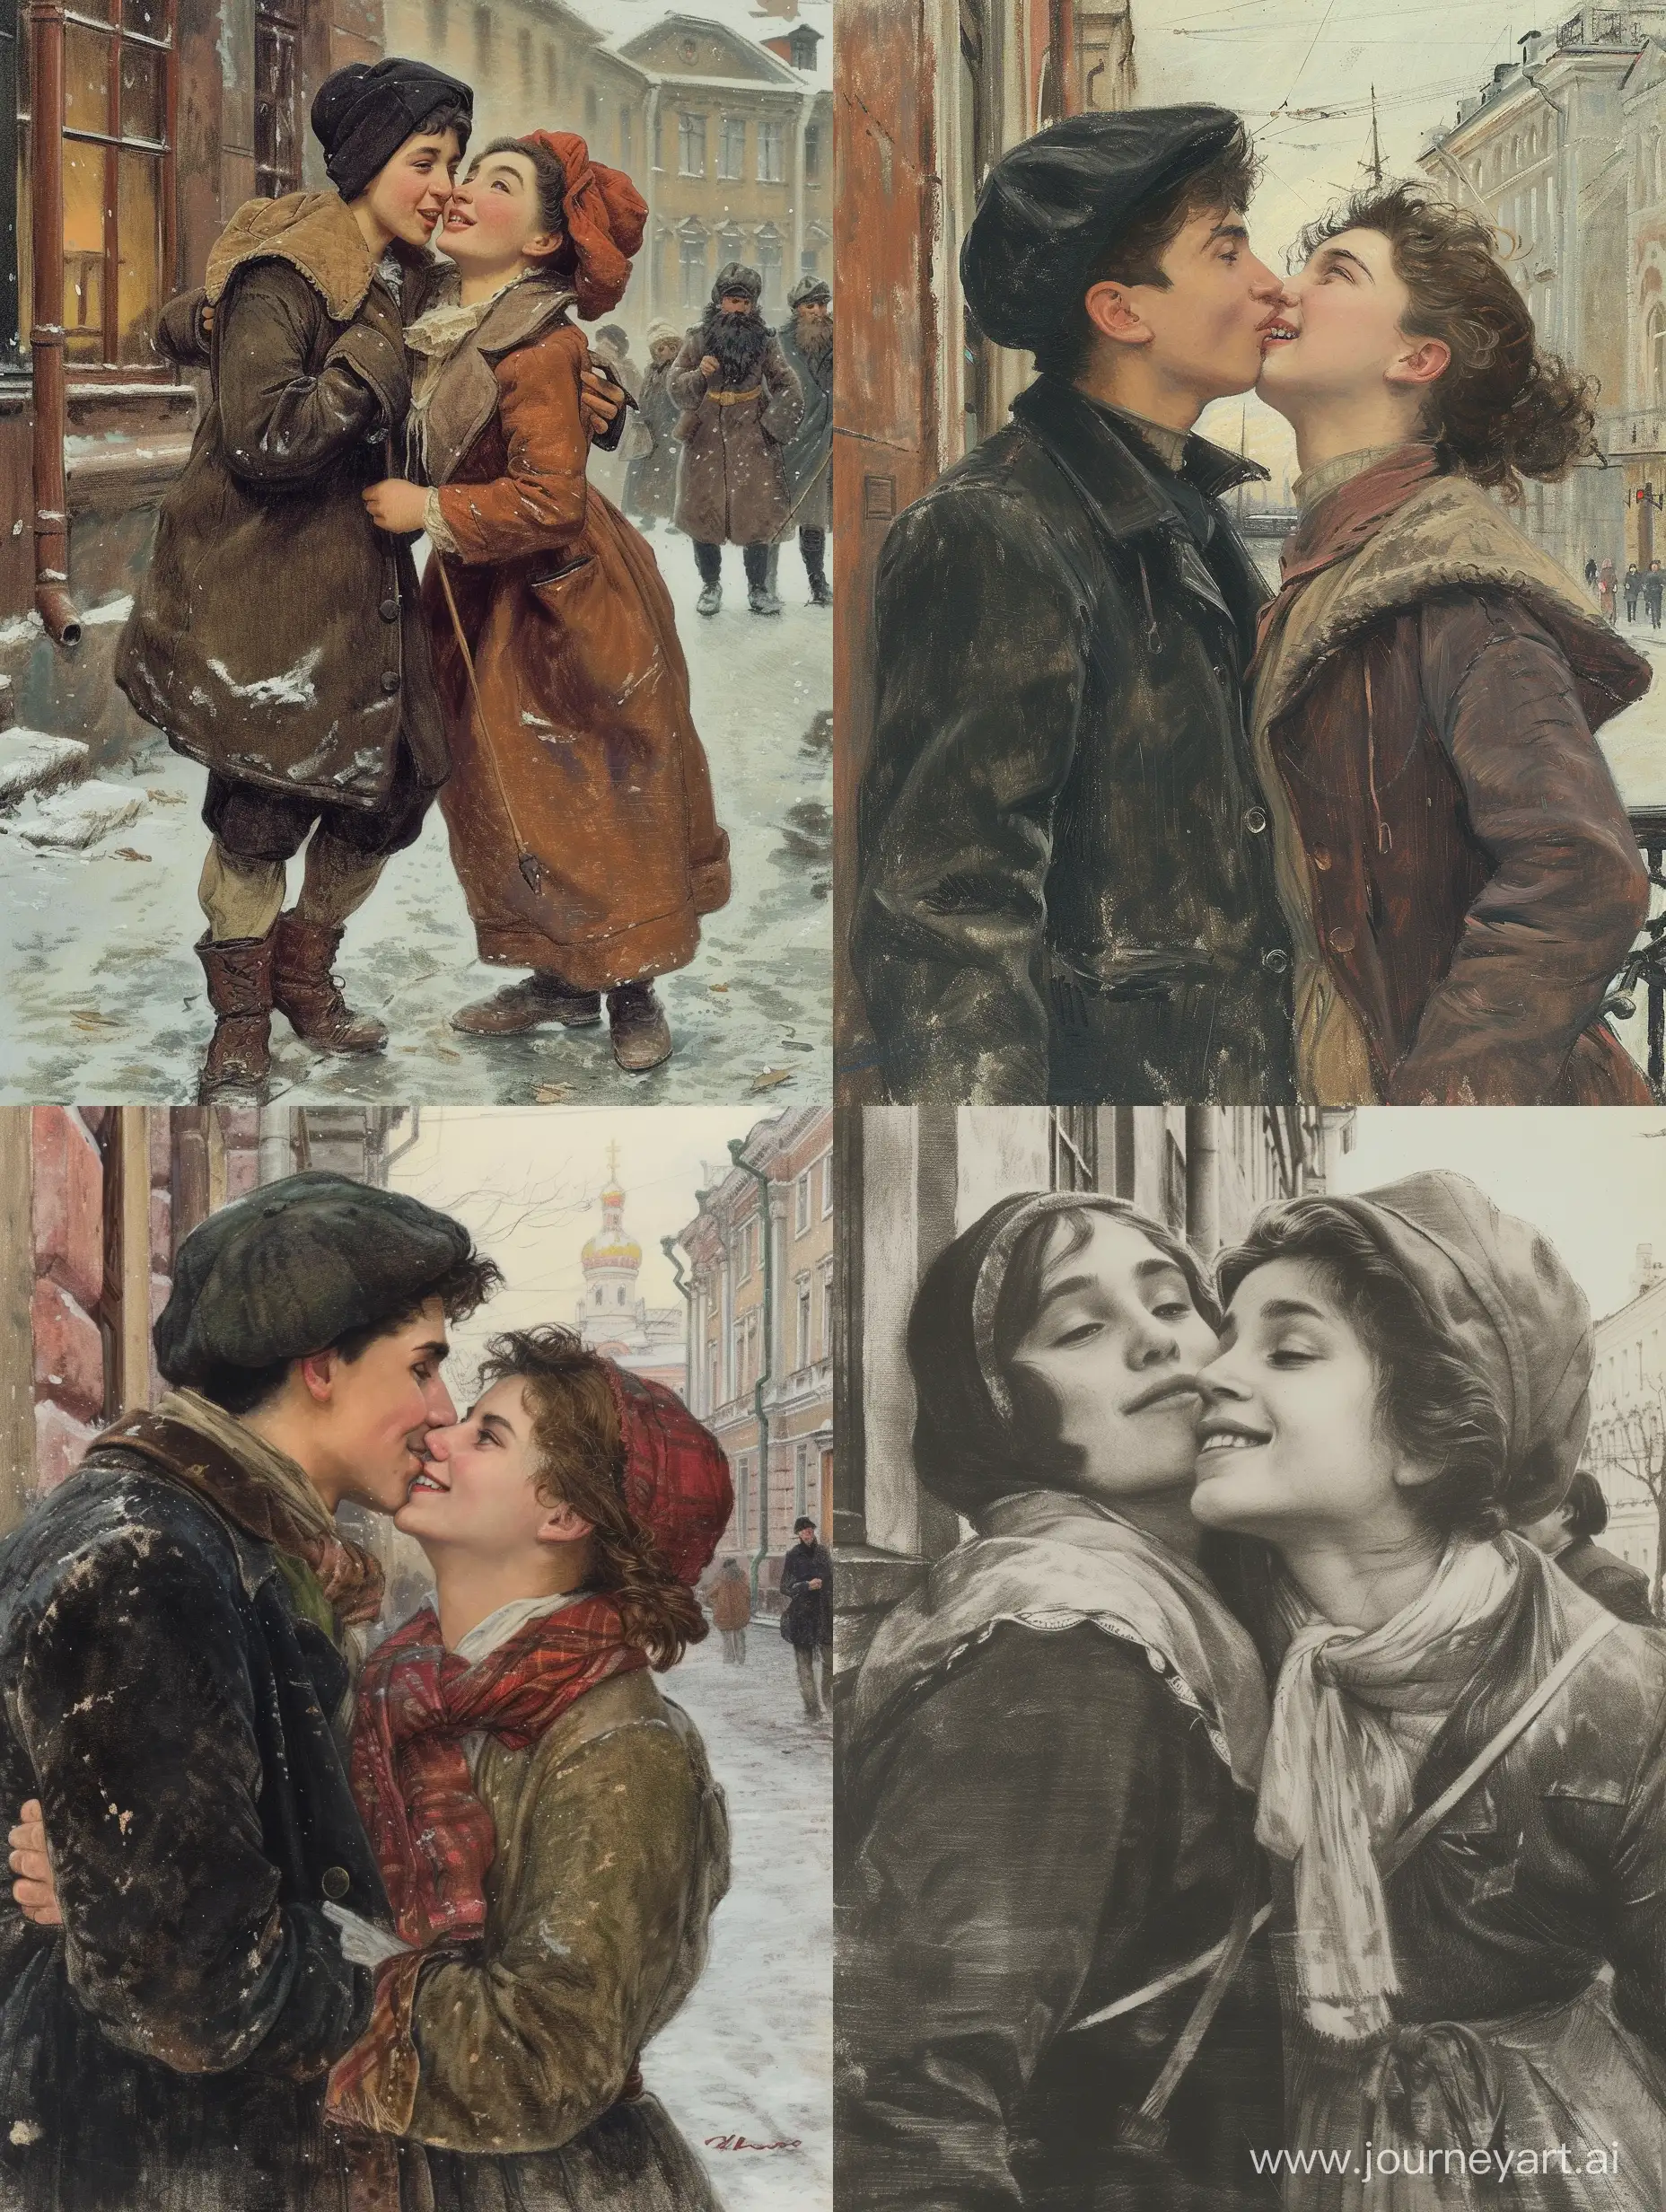 Charming-Encounter-in-19th-Century-St-Petersburg-Romantic-Kiss-Attempt-by-Young-Residents